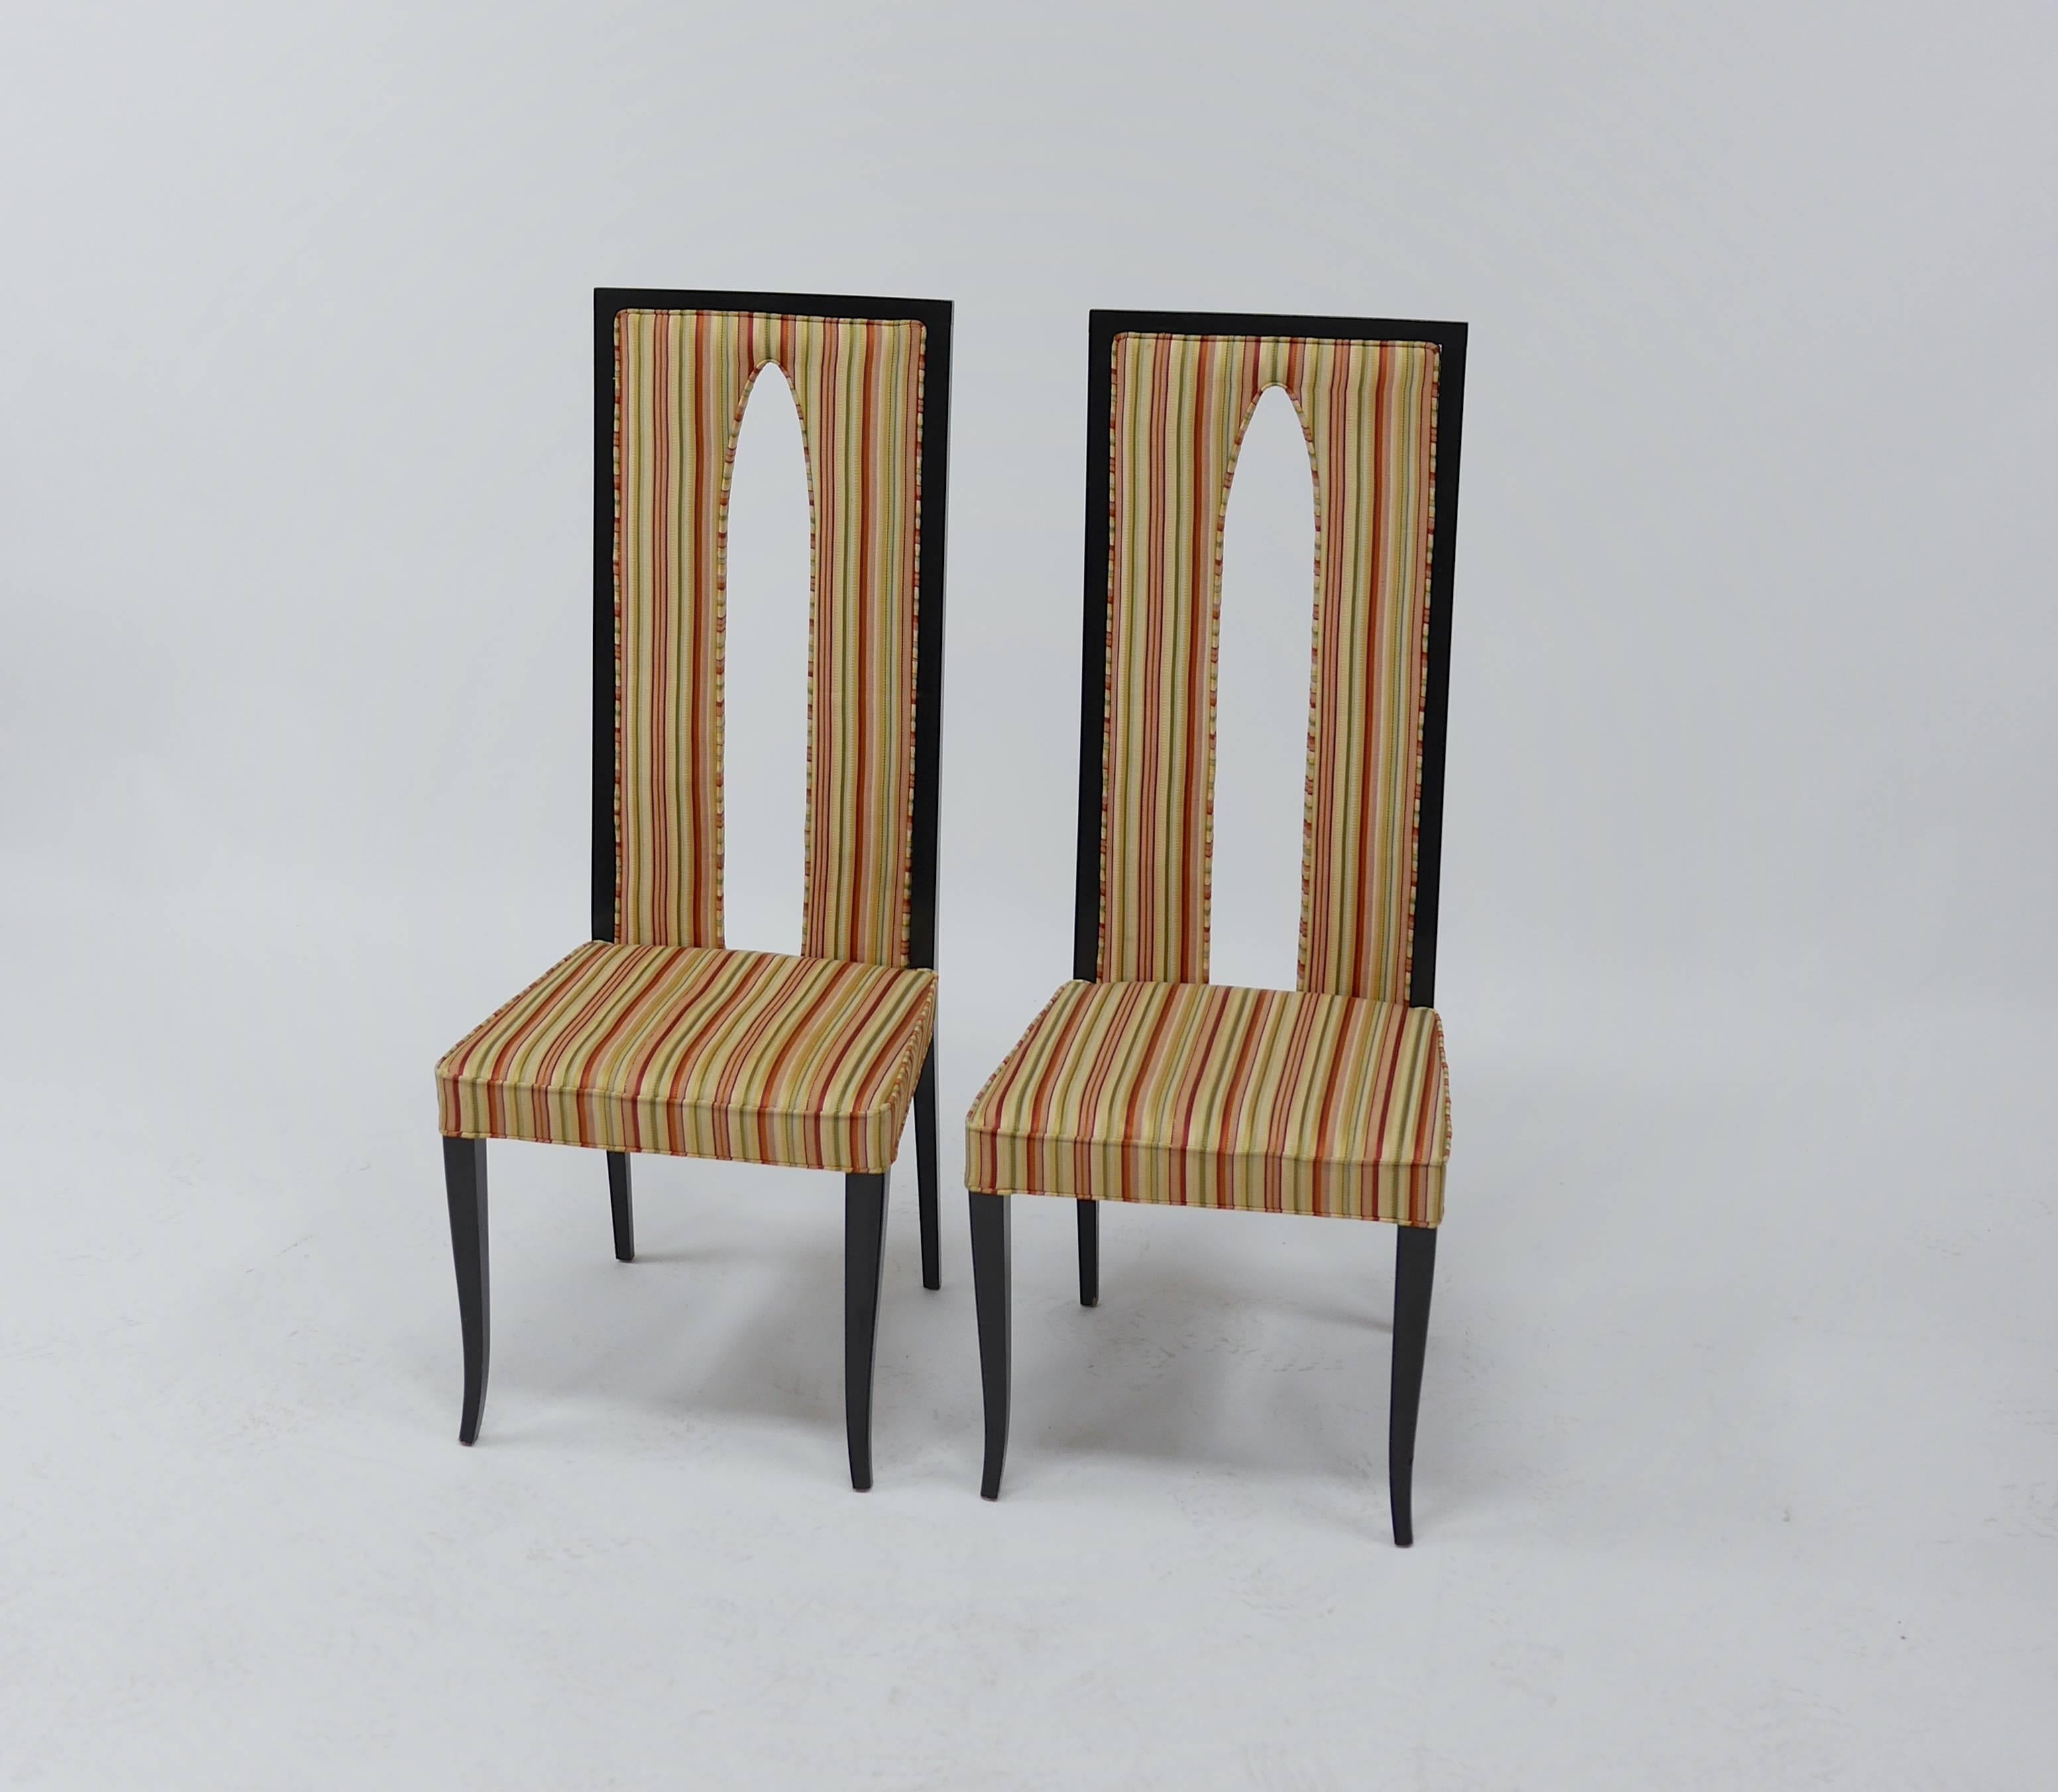 Pair of Italian high back sabre leg chairs in the manner of Gio Ponti. Marked 